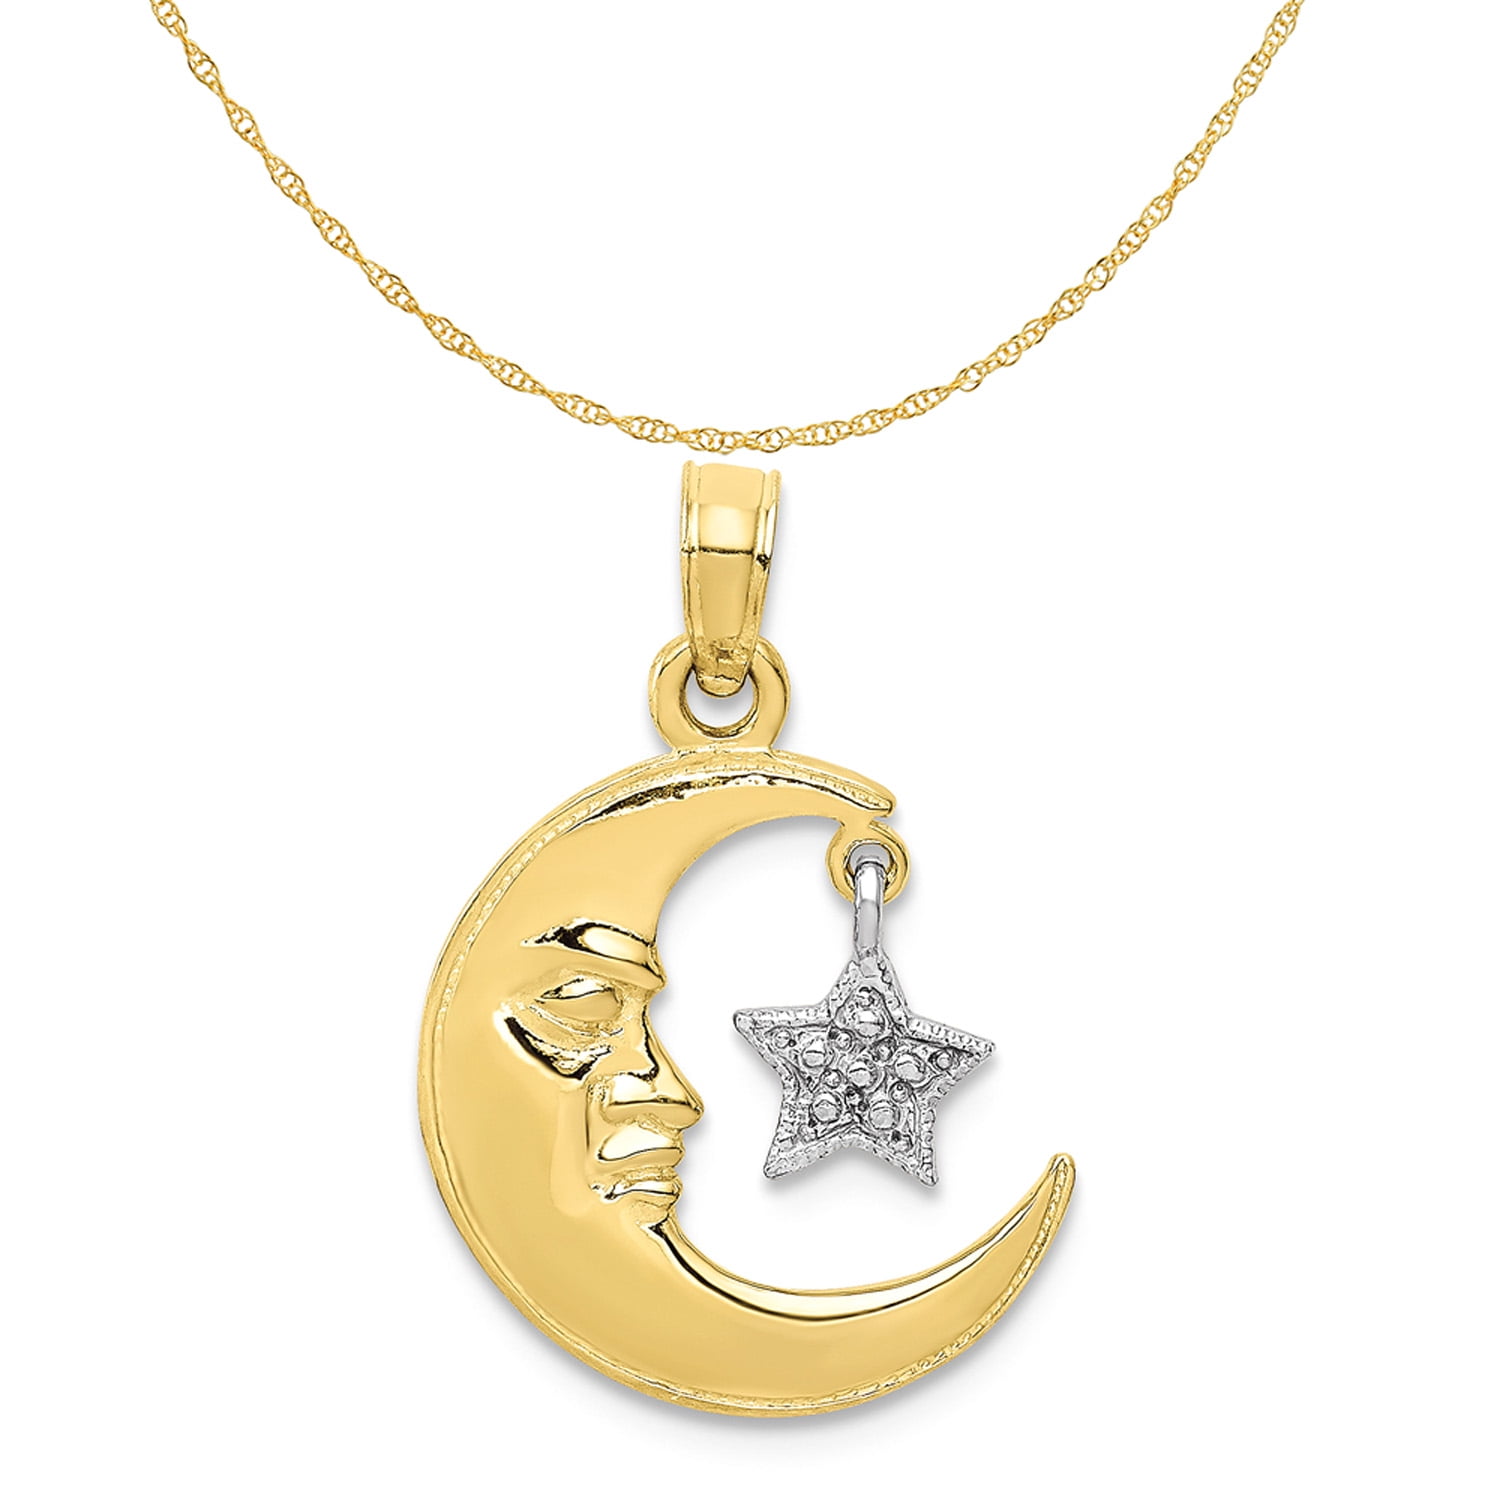 Details about   10k Two Tone Gold Half Moon With Face And Dangling Star Charm Pendant 